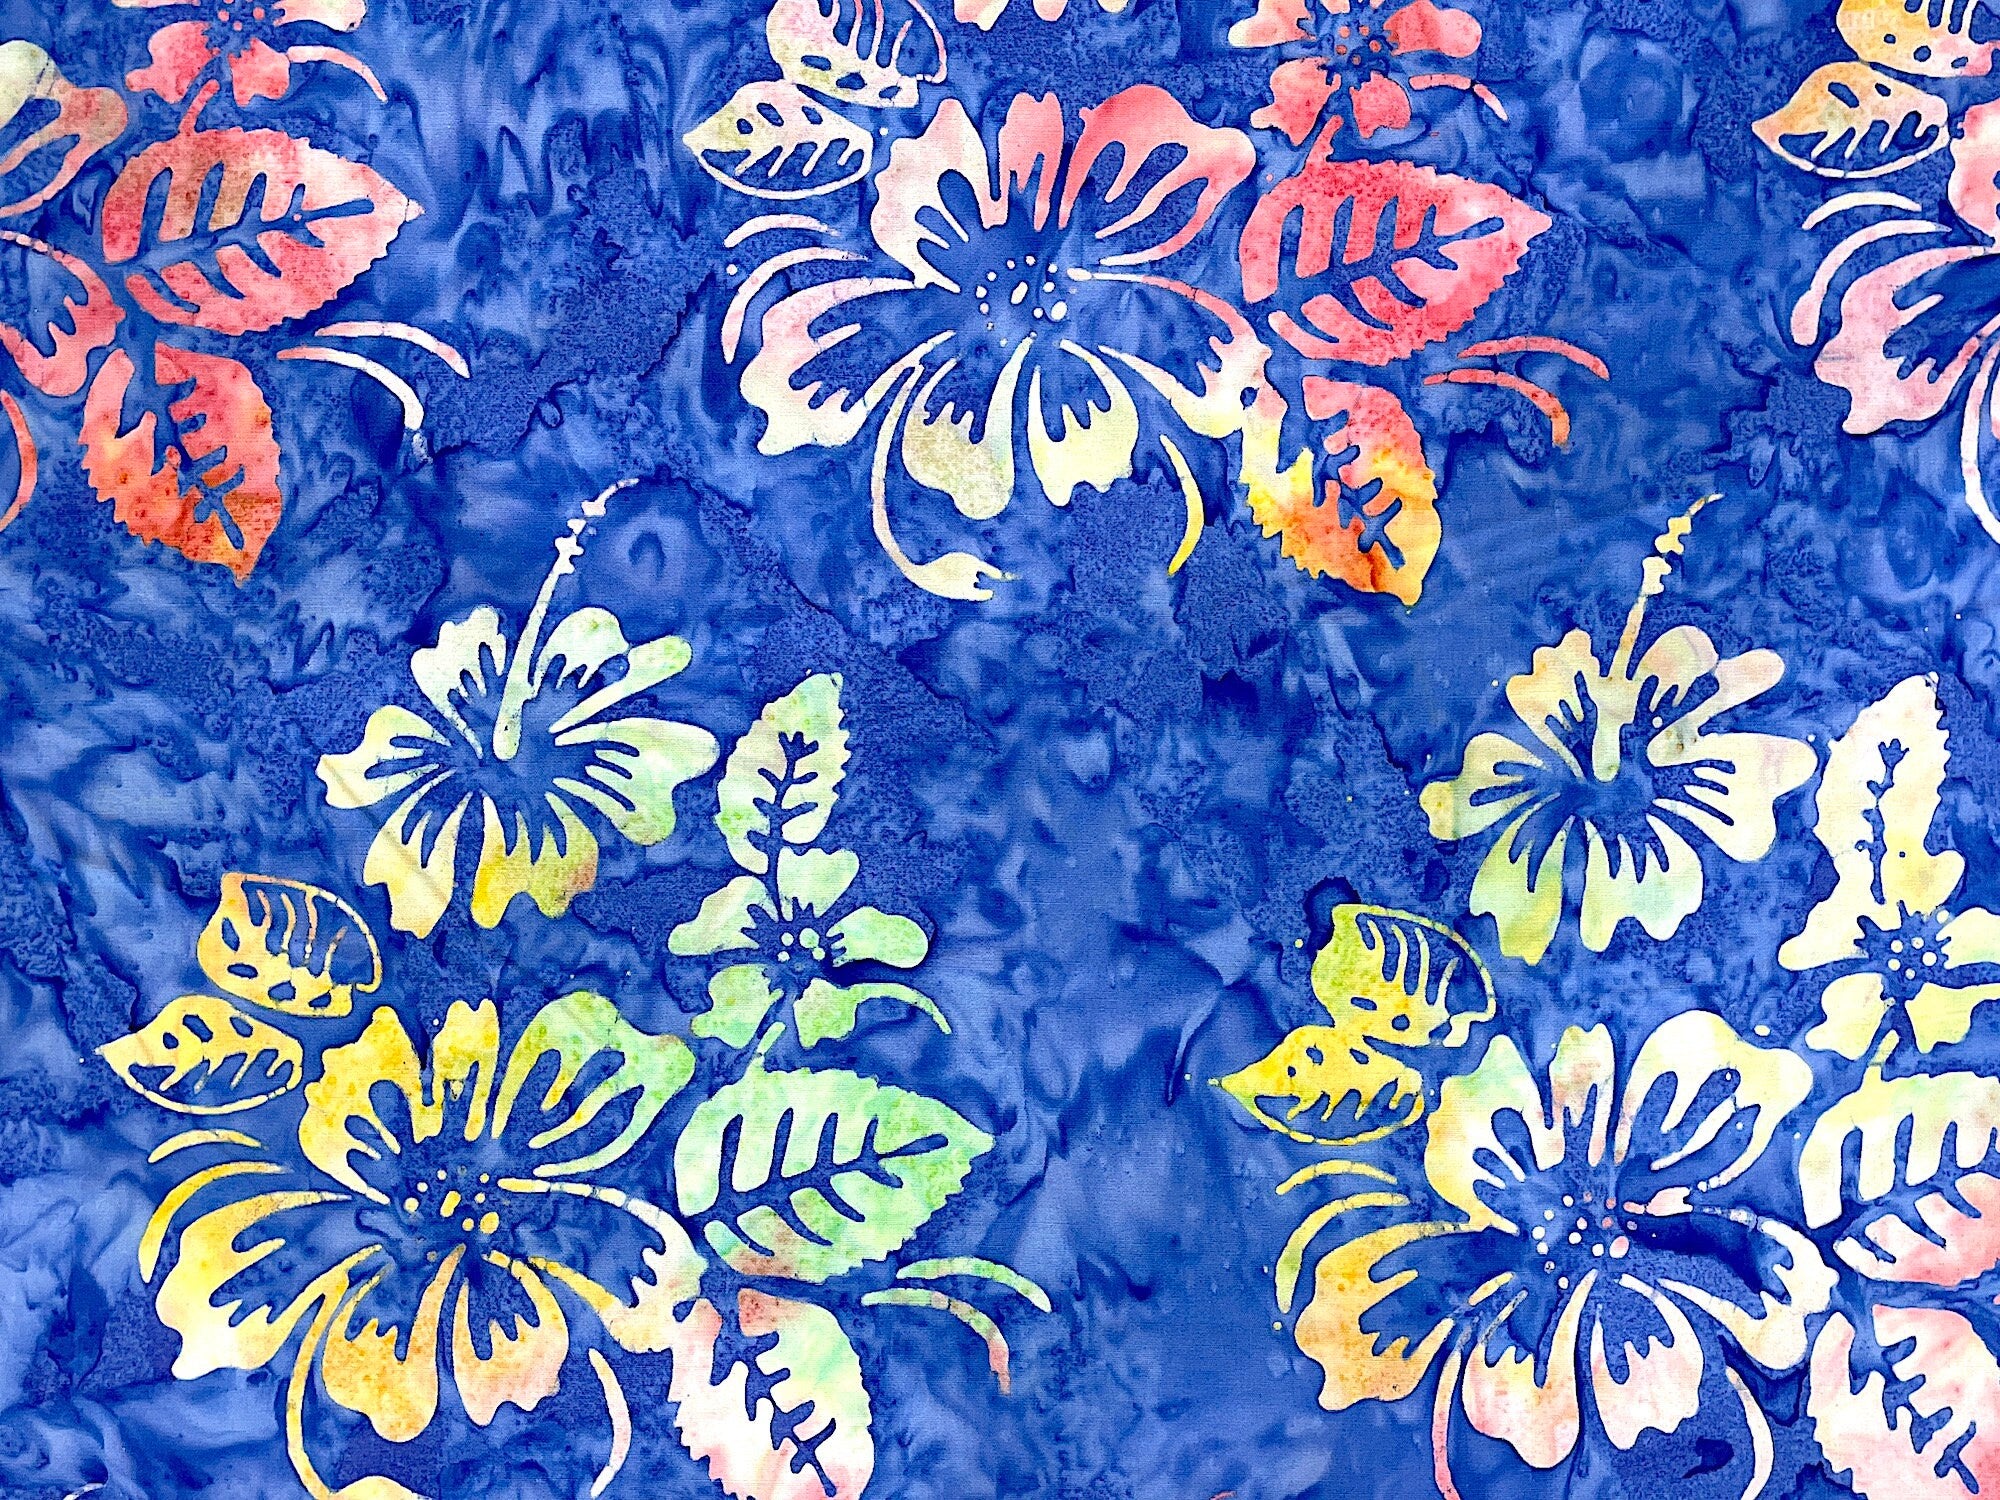 This fabric is covered with hibiscus. The flowers have shades of yellow, pink, blue and green. The background has shades of blue.